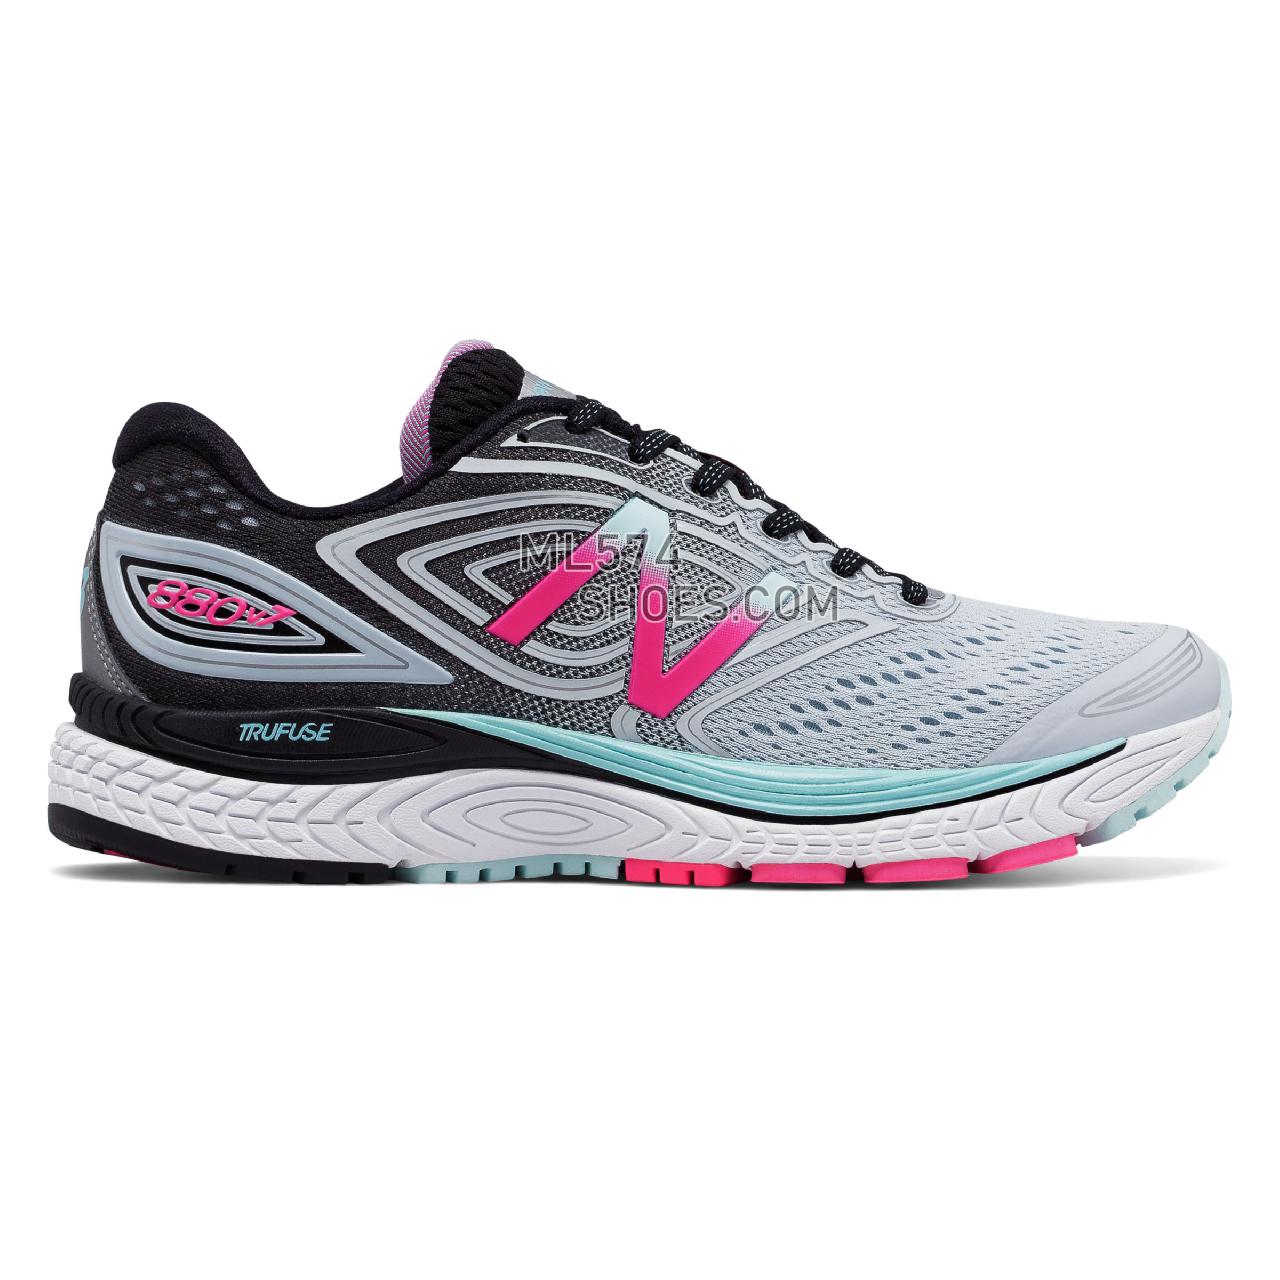 New Balance 880v7 - Women's 880 - Running Light Porcelain Blue with Black and Alpha Pink - W880GB7